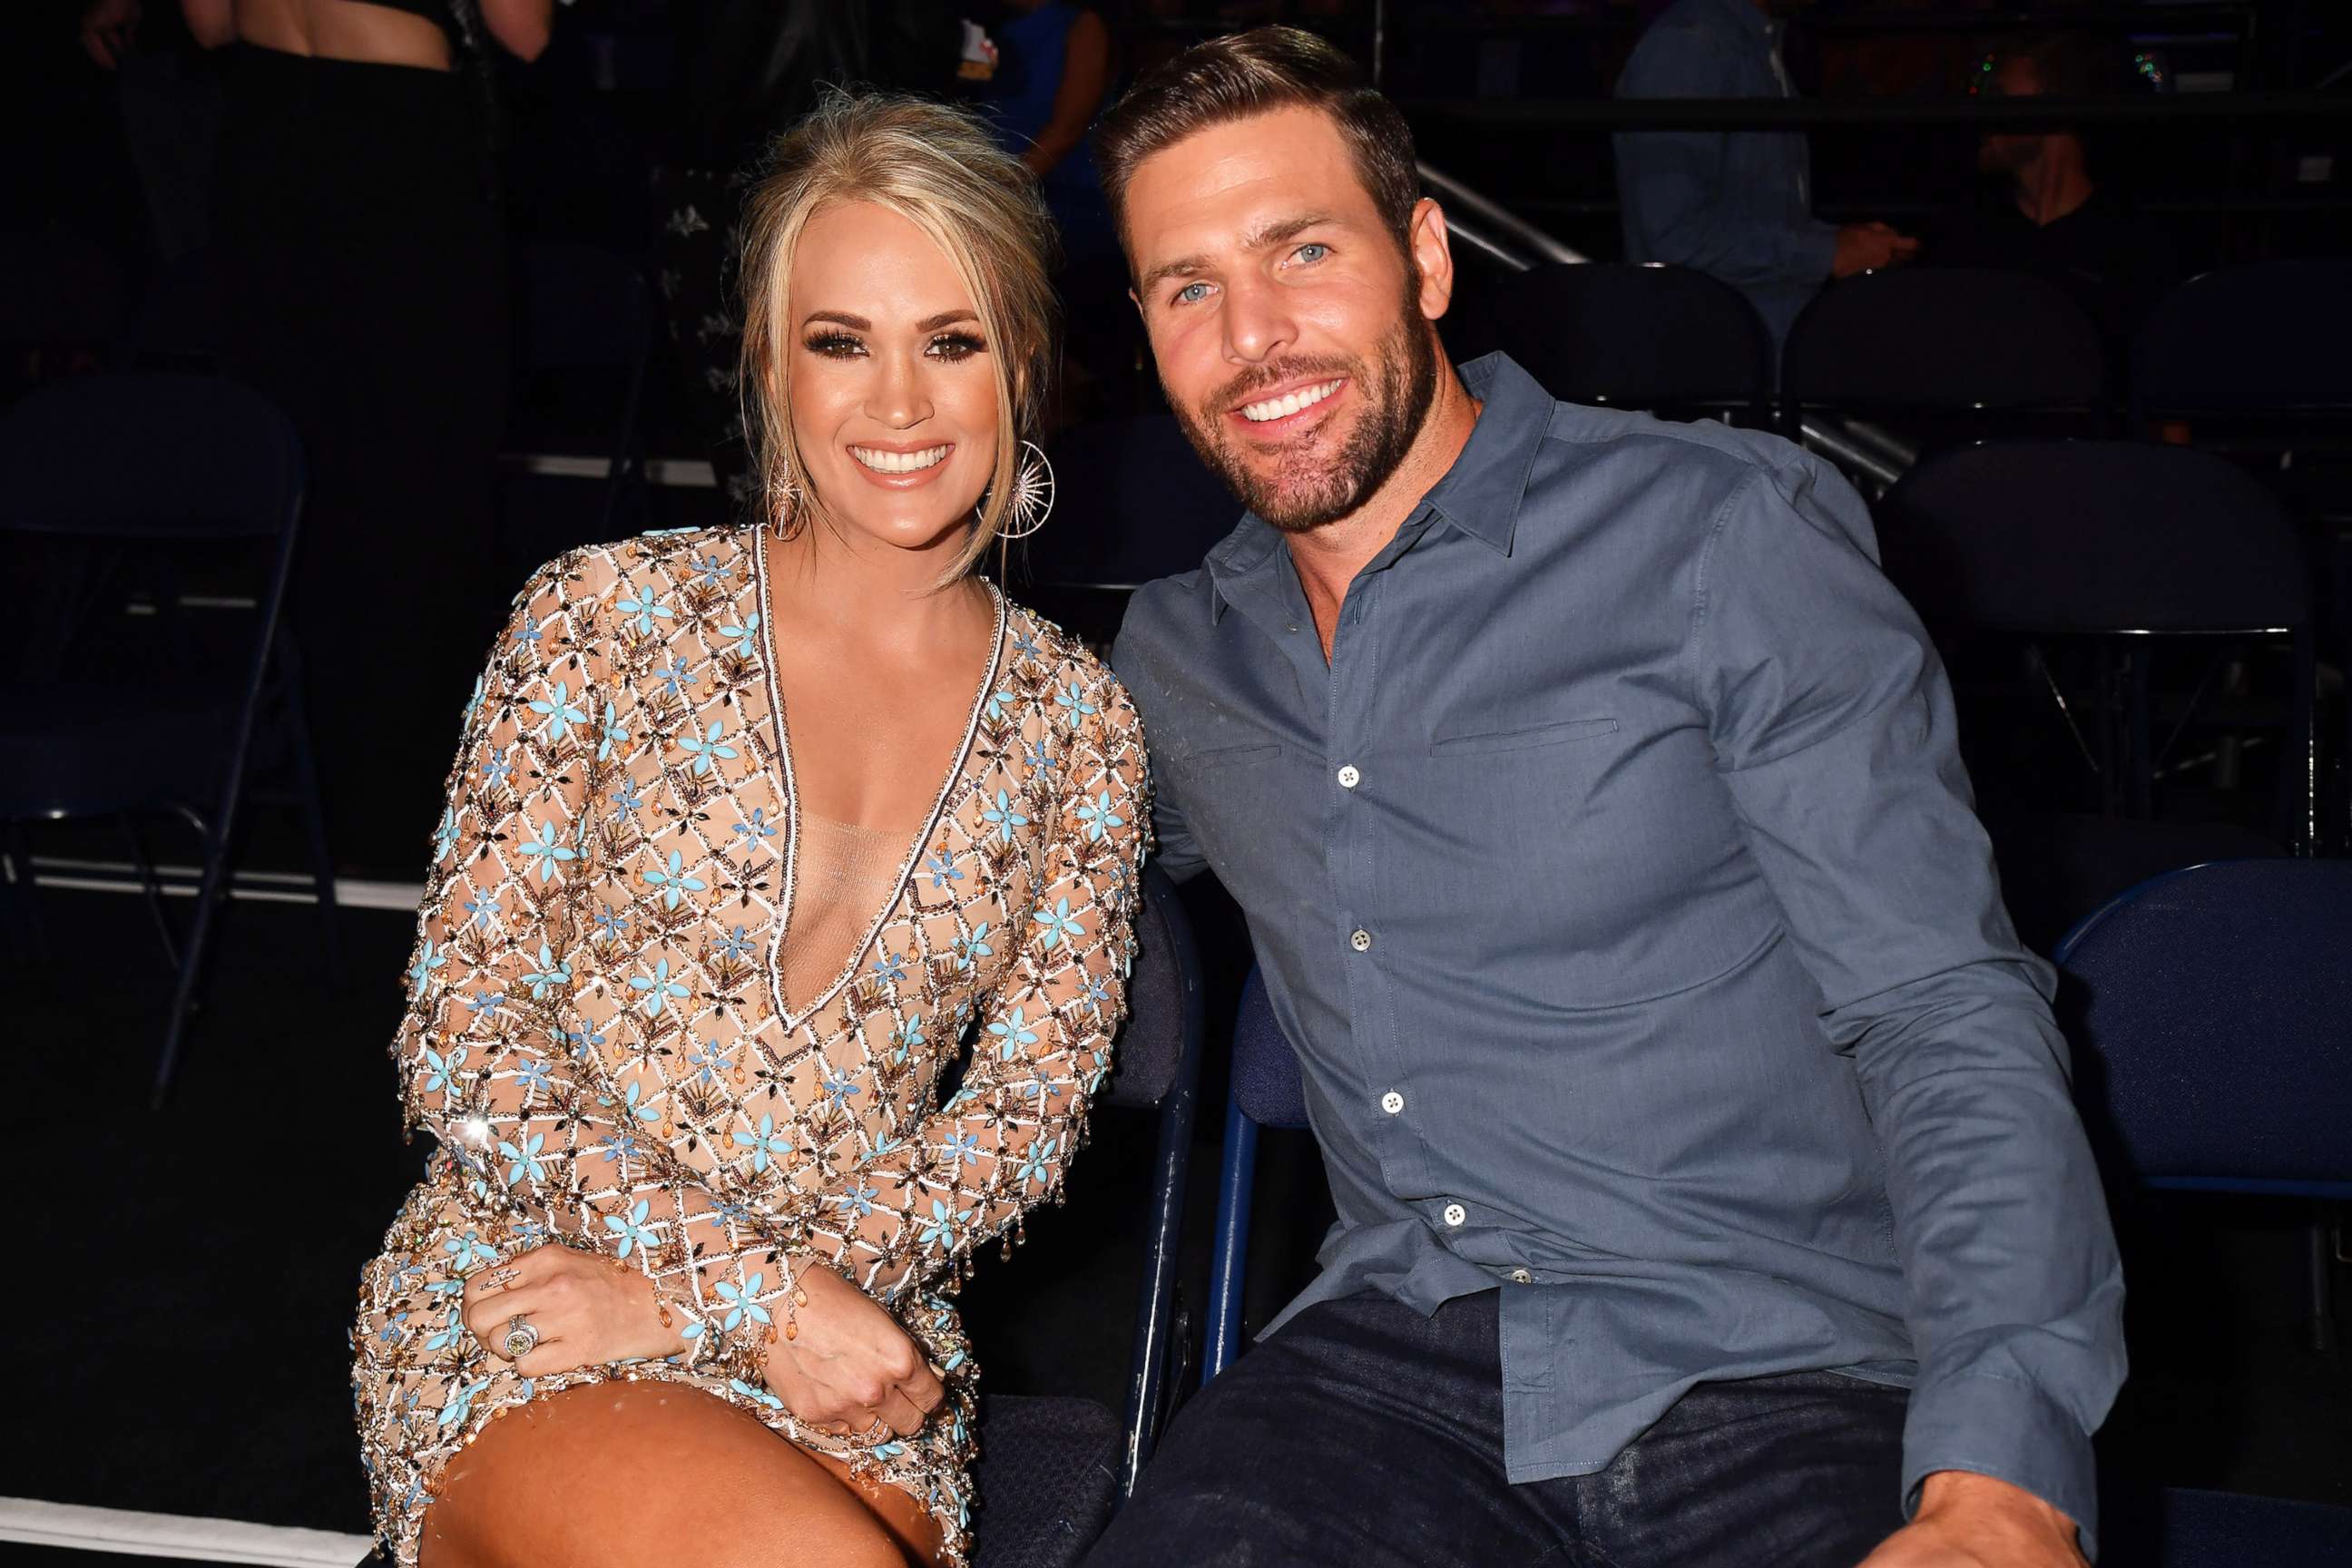 PHOTO: Carrie Underwood and Mike Fisher attend the 2019 CMT Music Awards at Bridgestone Arena on June 05, 2019 in Nashville, Tn.